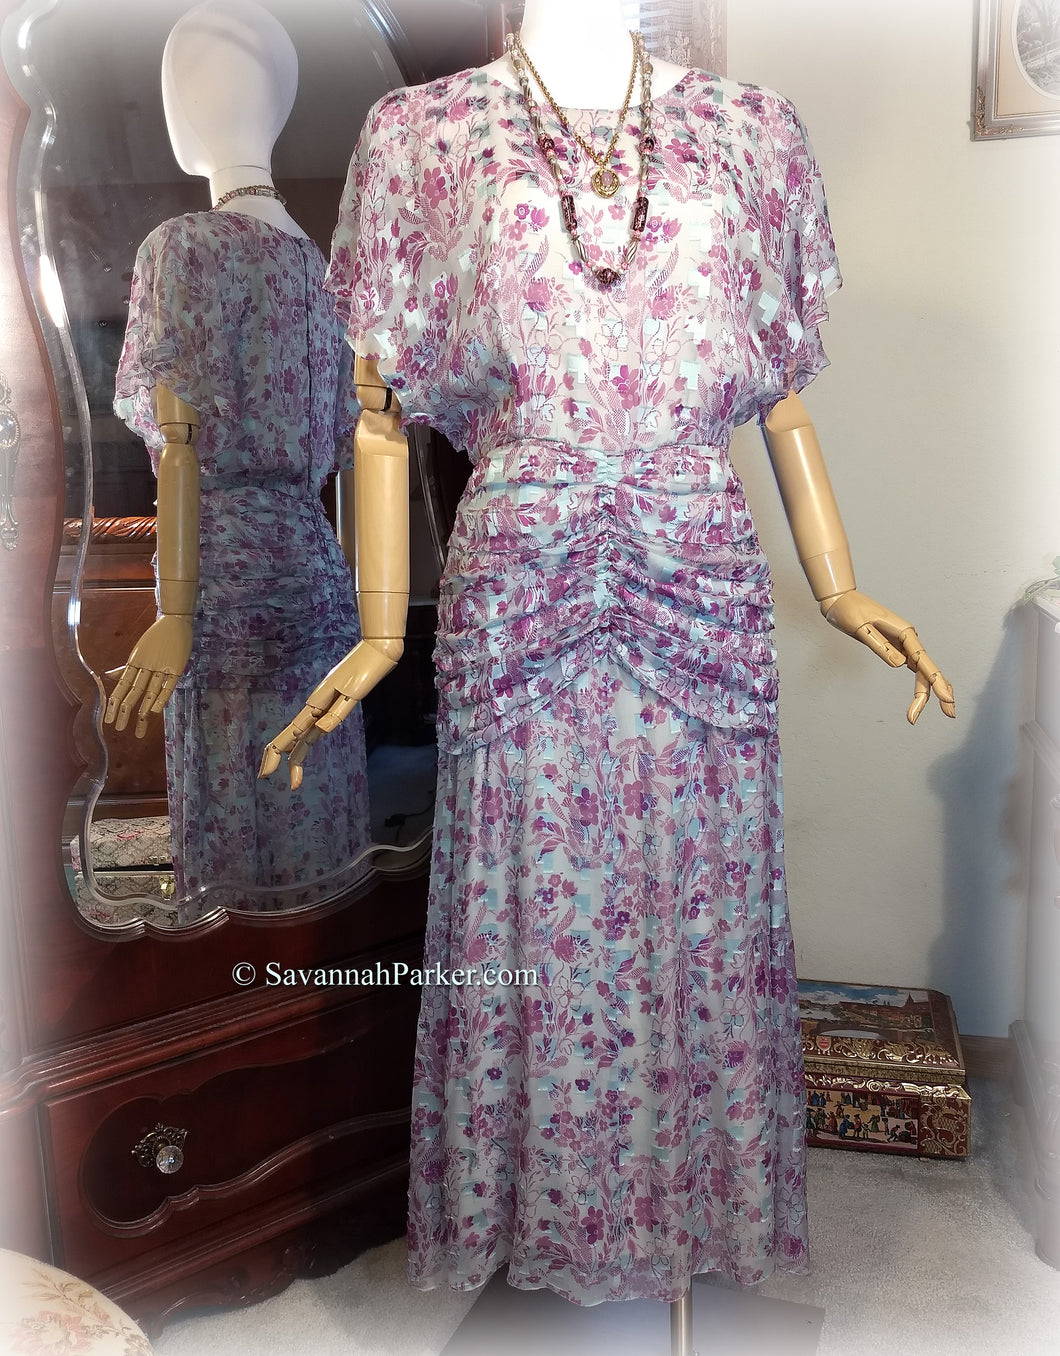 SOLD Exquisite Vintage 1980s Does 1930s Dress / Designed by Icinoo (Silk Farm) / Multilayered / Orchid Purple and Pale Blue Sheer Silk Chiffon